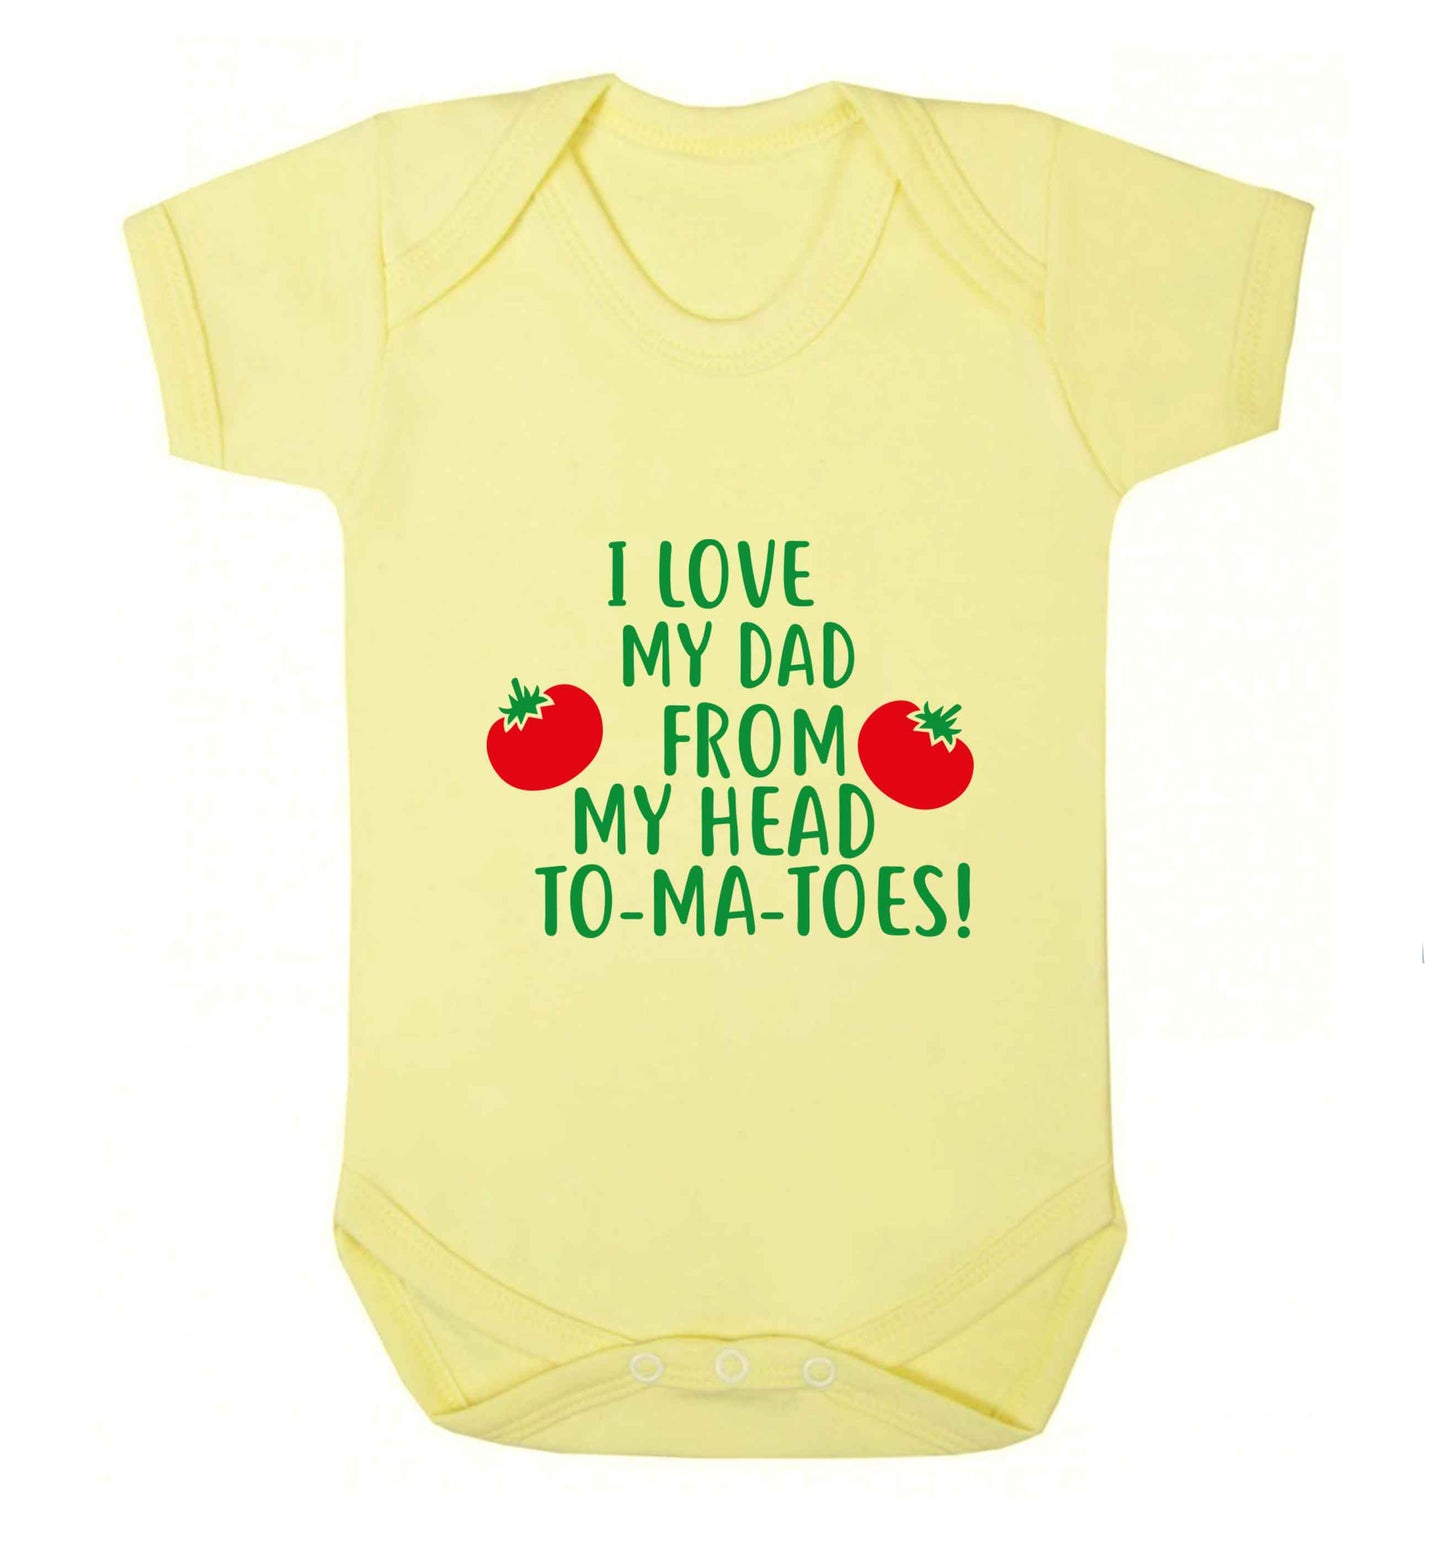 I love my dad from my head to-ma-toes baby vest pale yellow 18-24 months